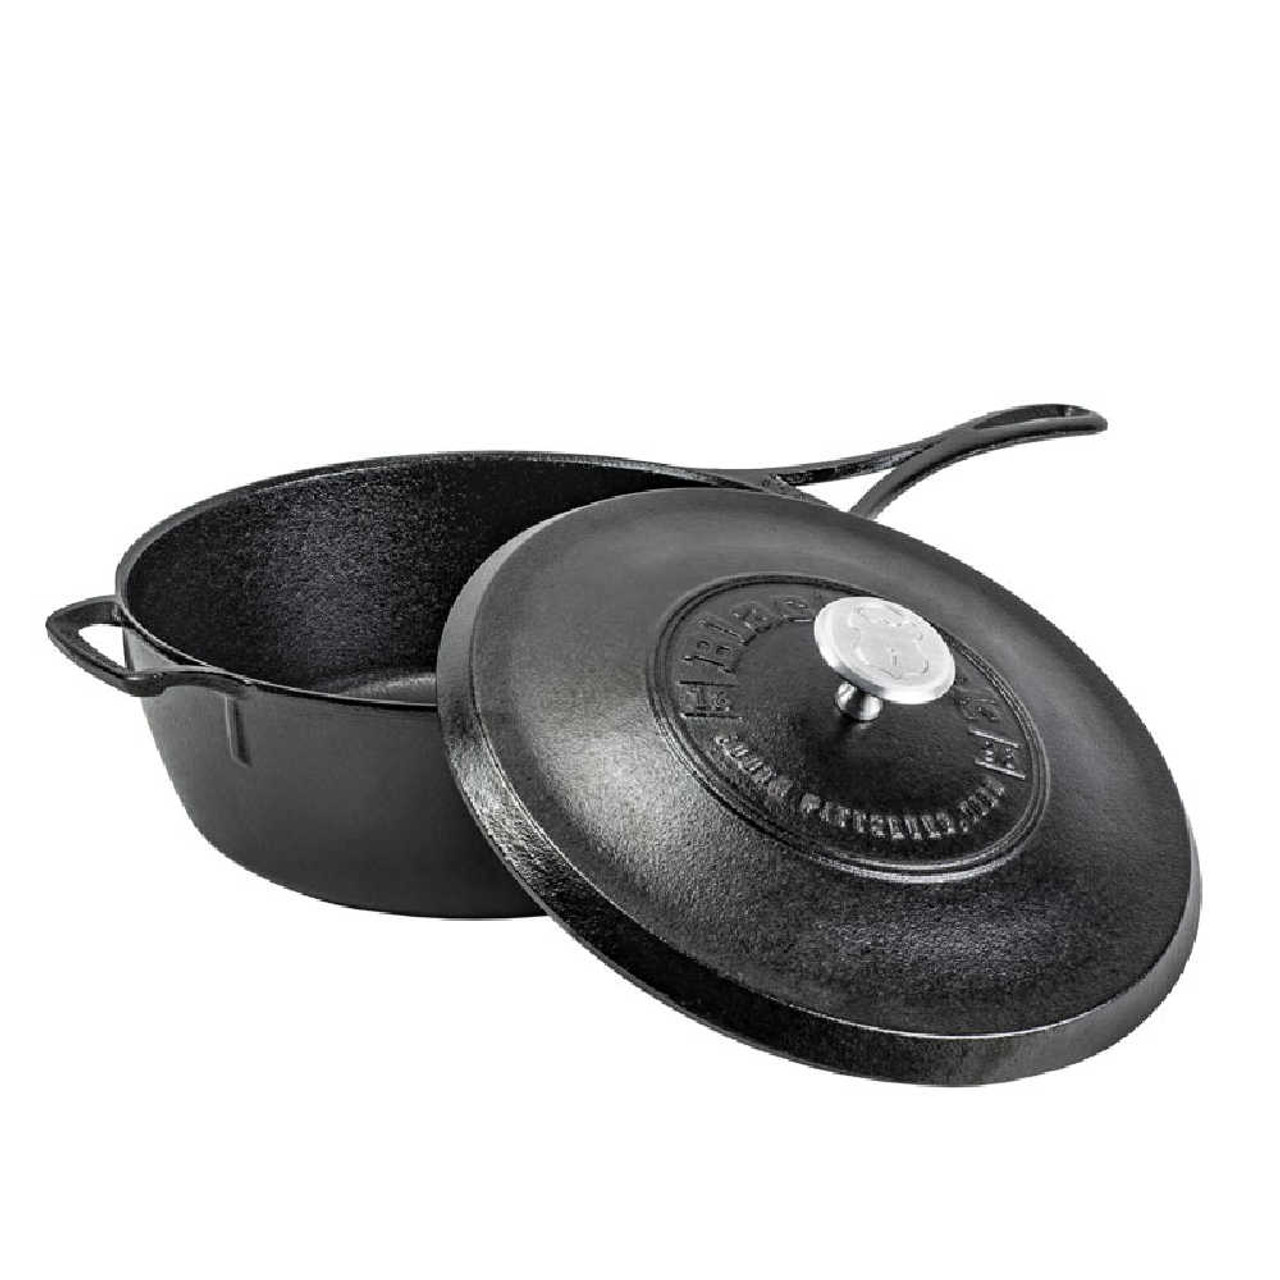 https://cdn11.bigcommerce.com/s-hccytny0od/images/stencil/1280x1280/products/4786/19510/Lodge_Blacklock_Cast_Iron_Deep_Skillet_With_Lid_1__09657.1654635335.jpg?c=2?imbypass=on